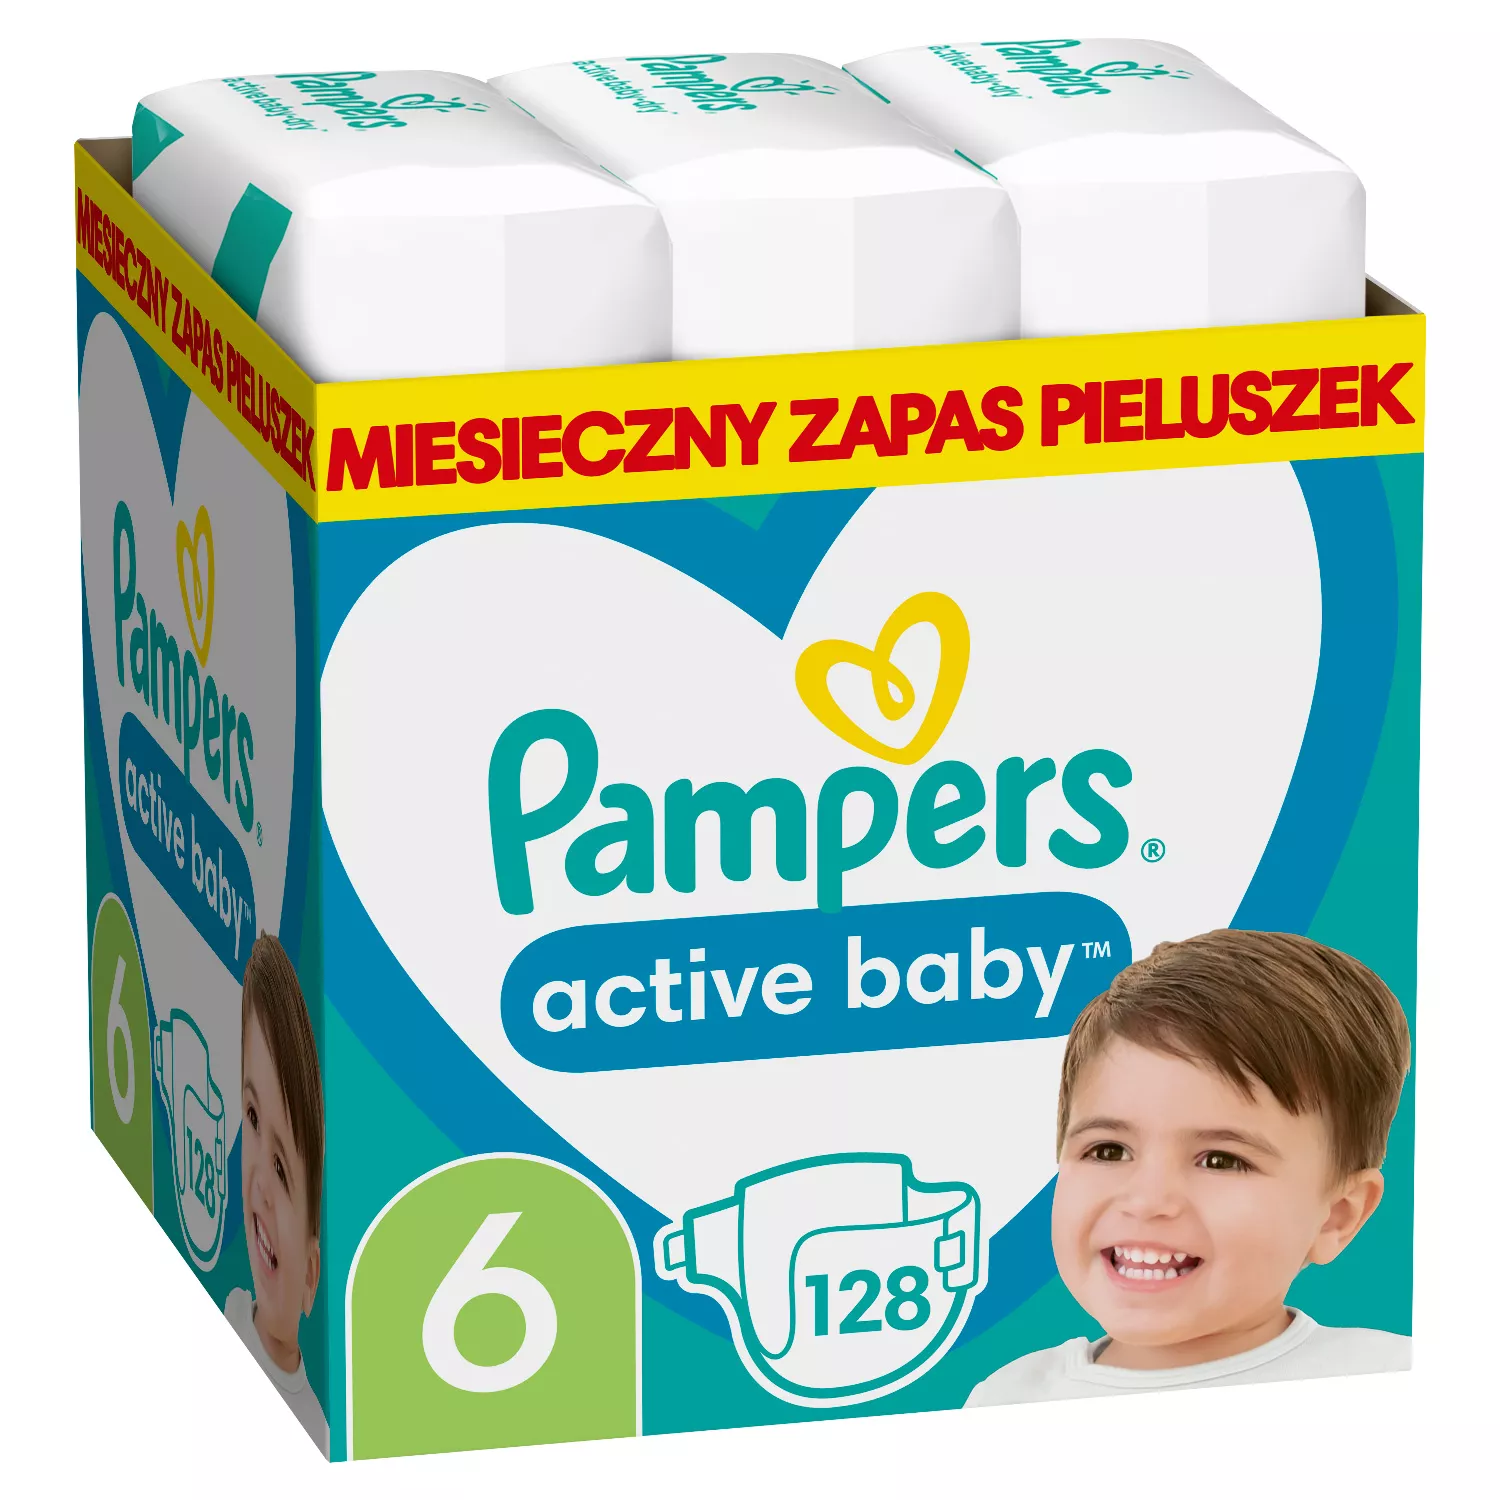 afult in a pampers